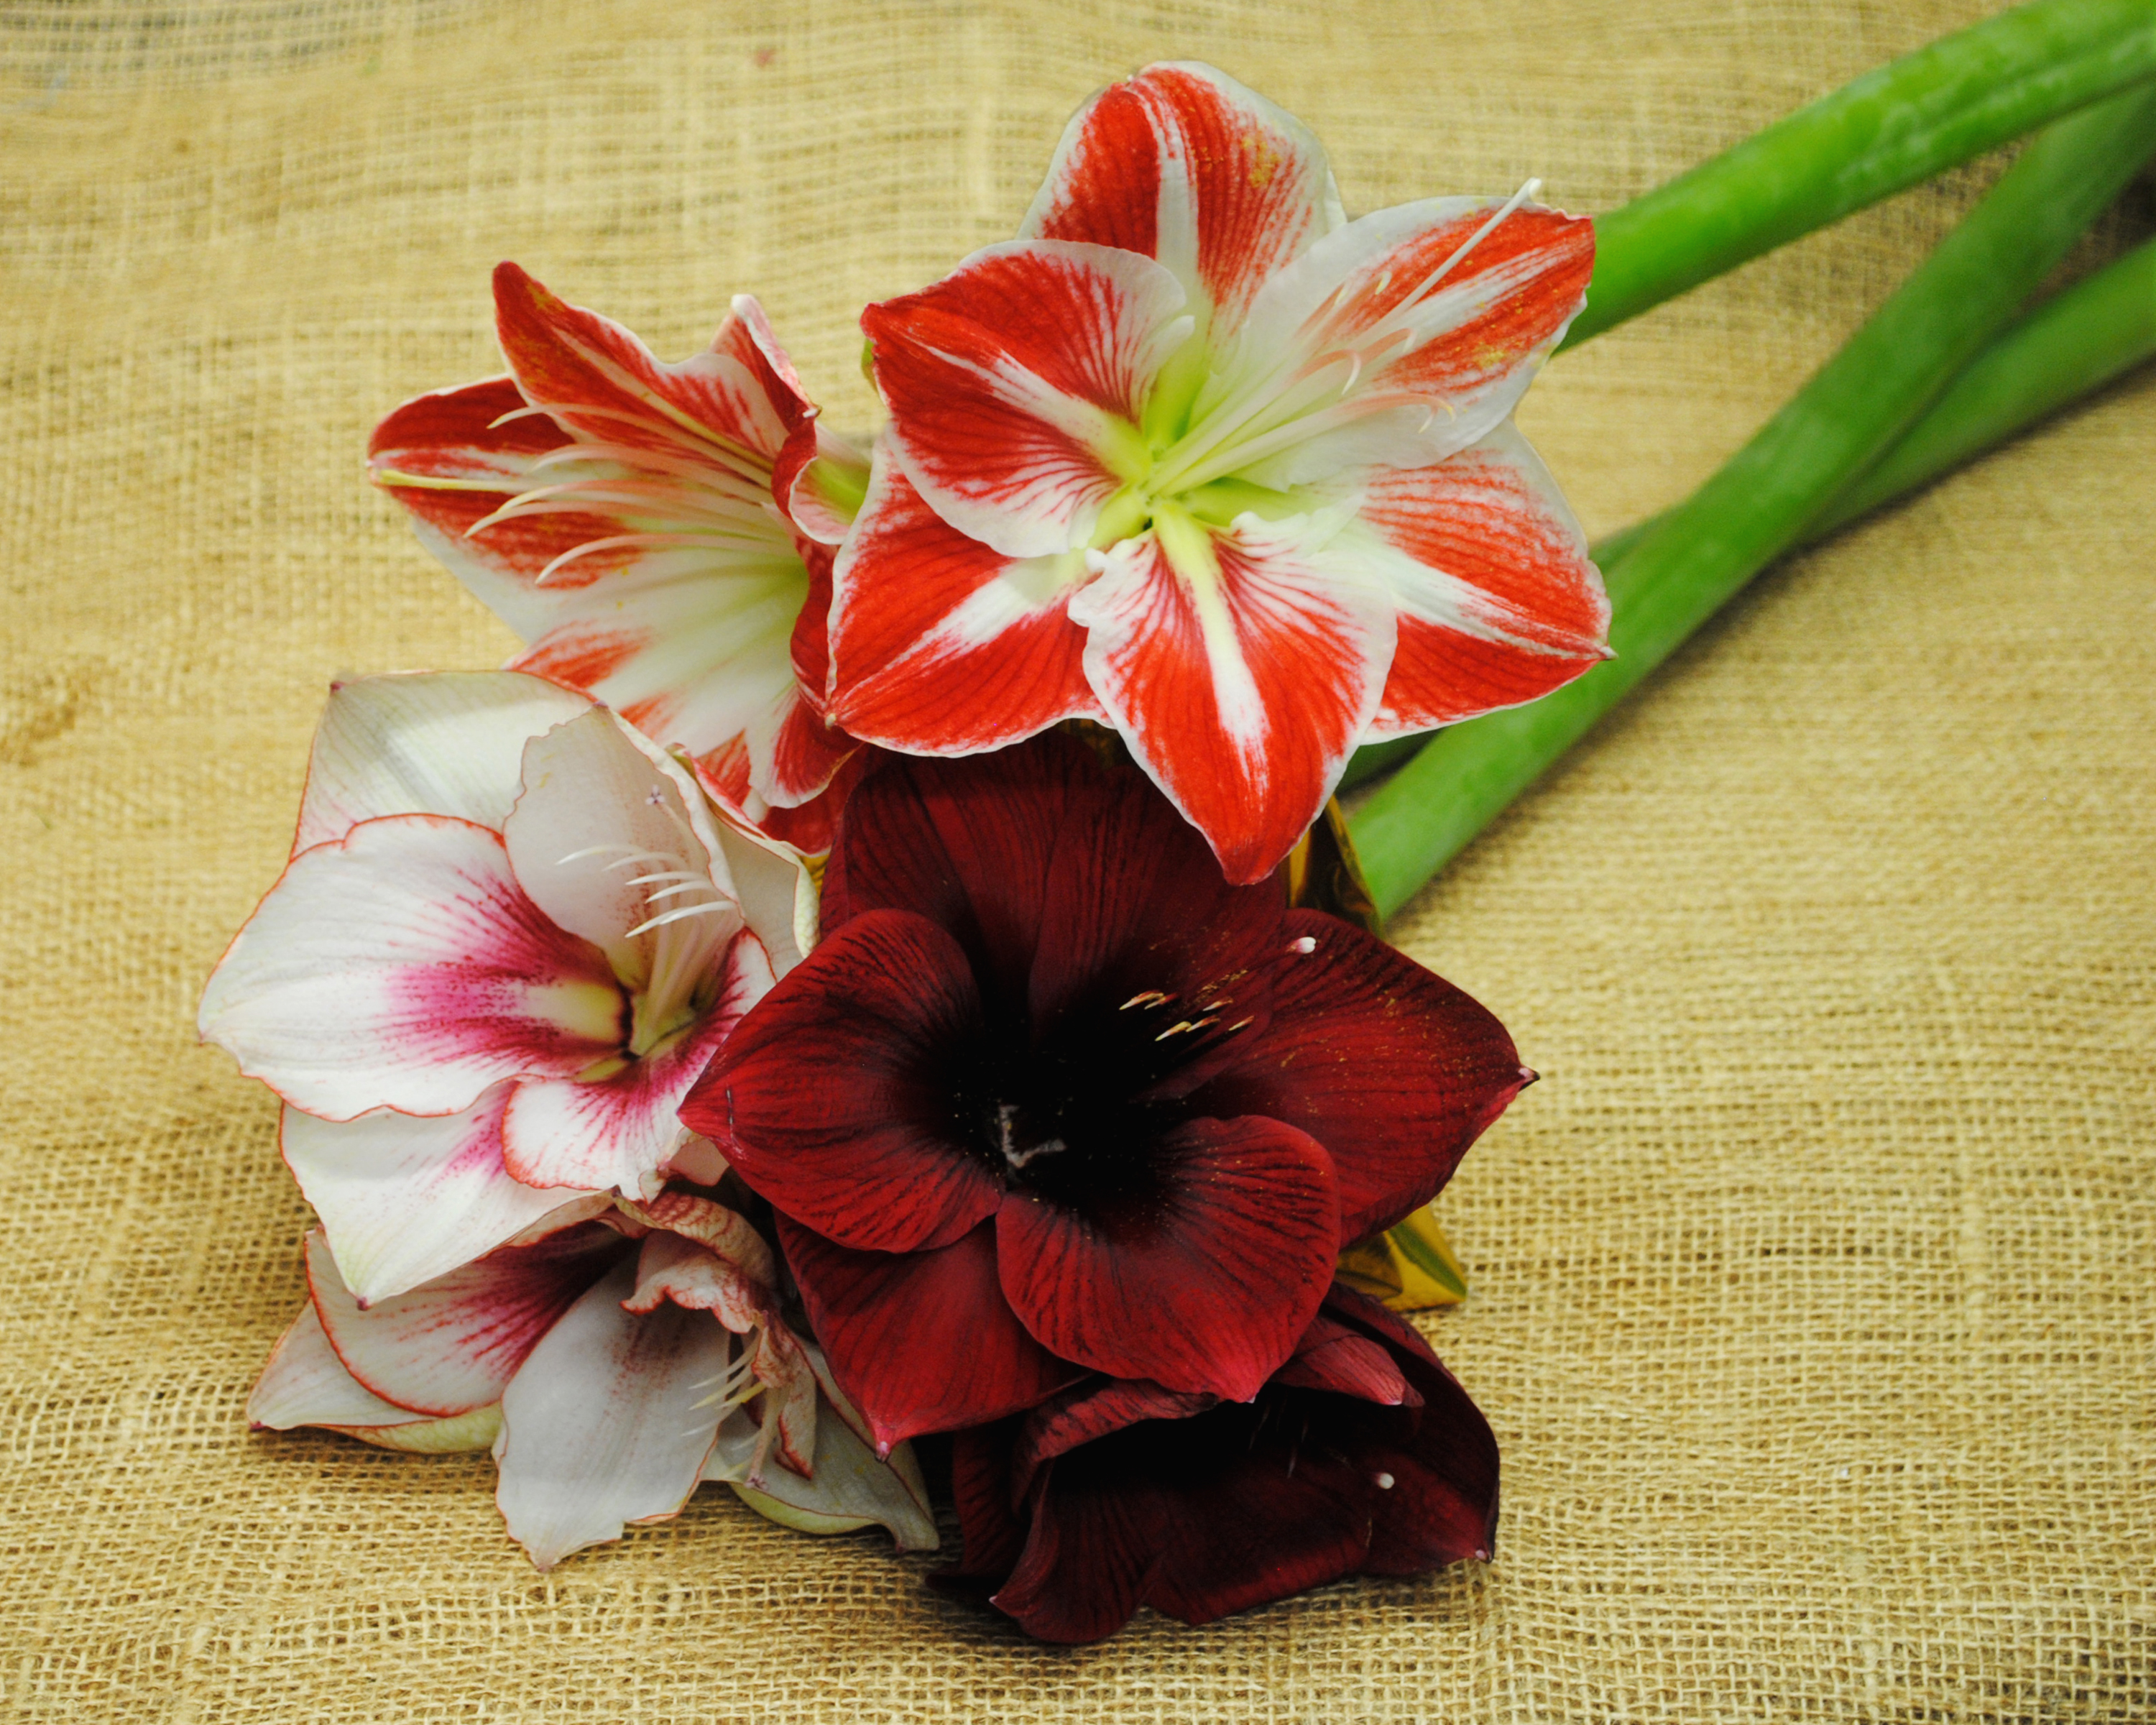 earth, amaryllis, close up, flower, lily, red flower, flowers